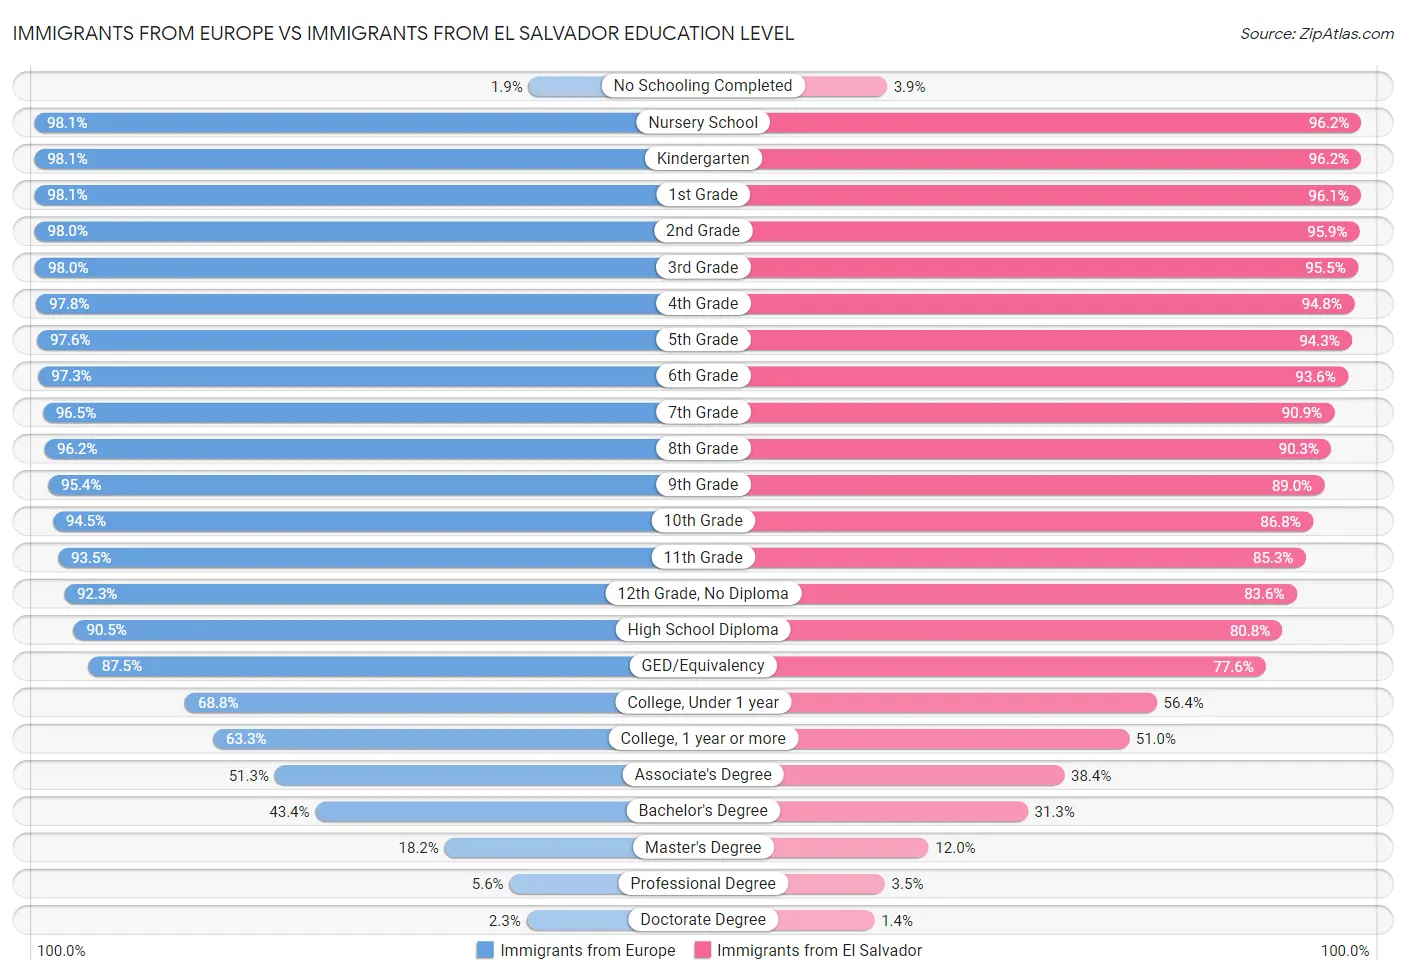 Immigrants from Europe vs Immigrants from El Salvador Education Level